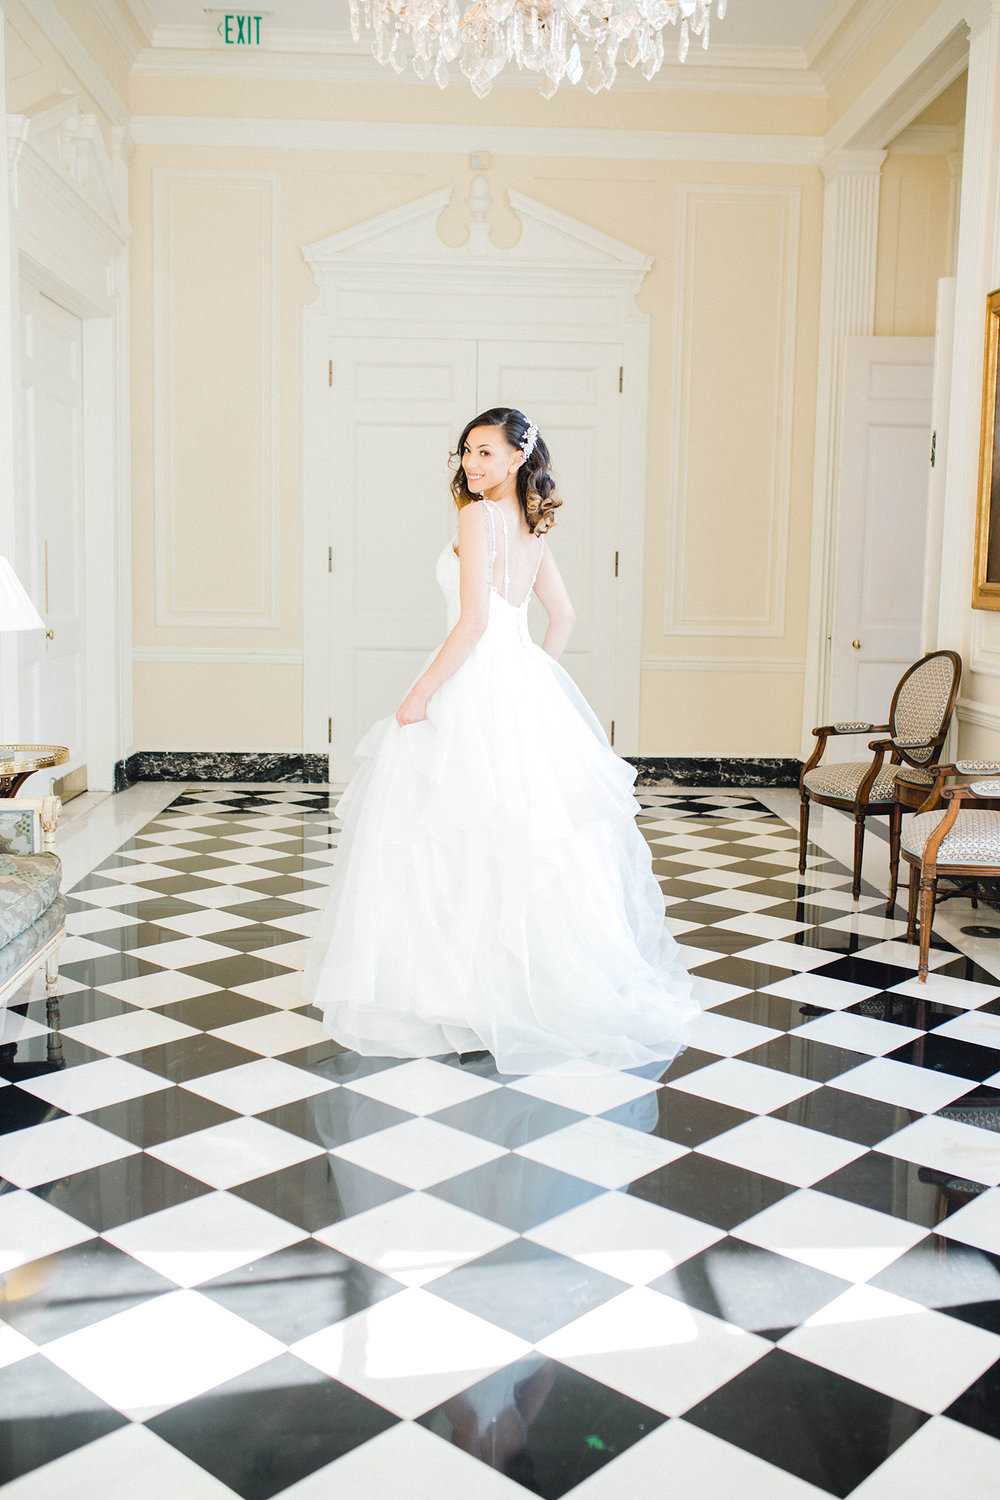 A bride on a checkerboard floor at the Duke Mansion in Charlotte, NC